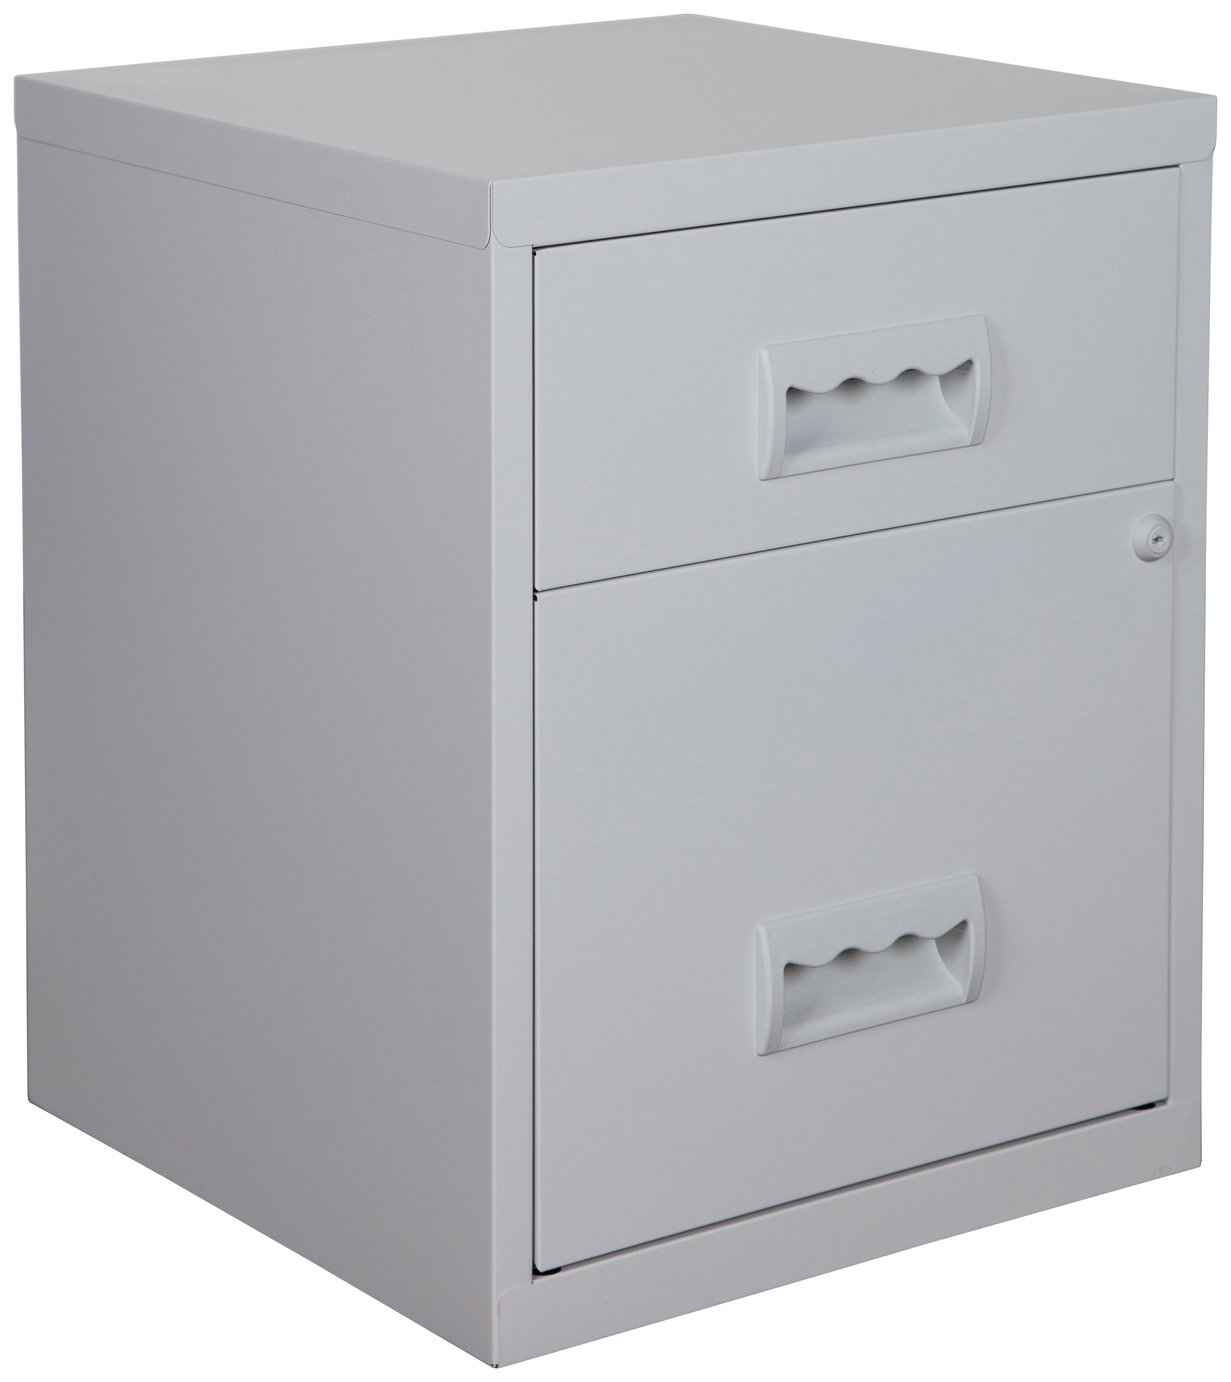 Pierre Henry 2 Drawer Combi Filing Cabinet - Grey